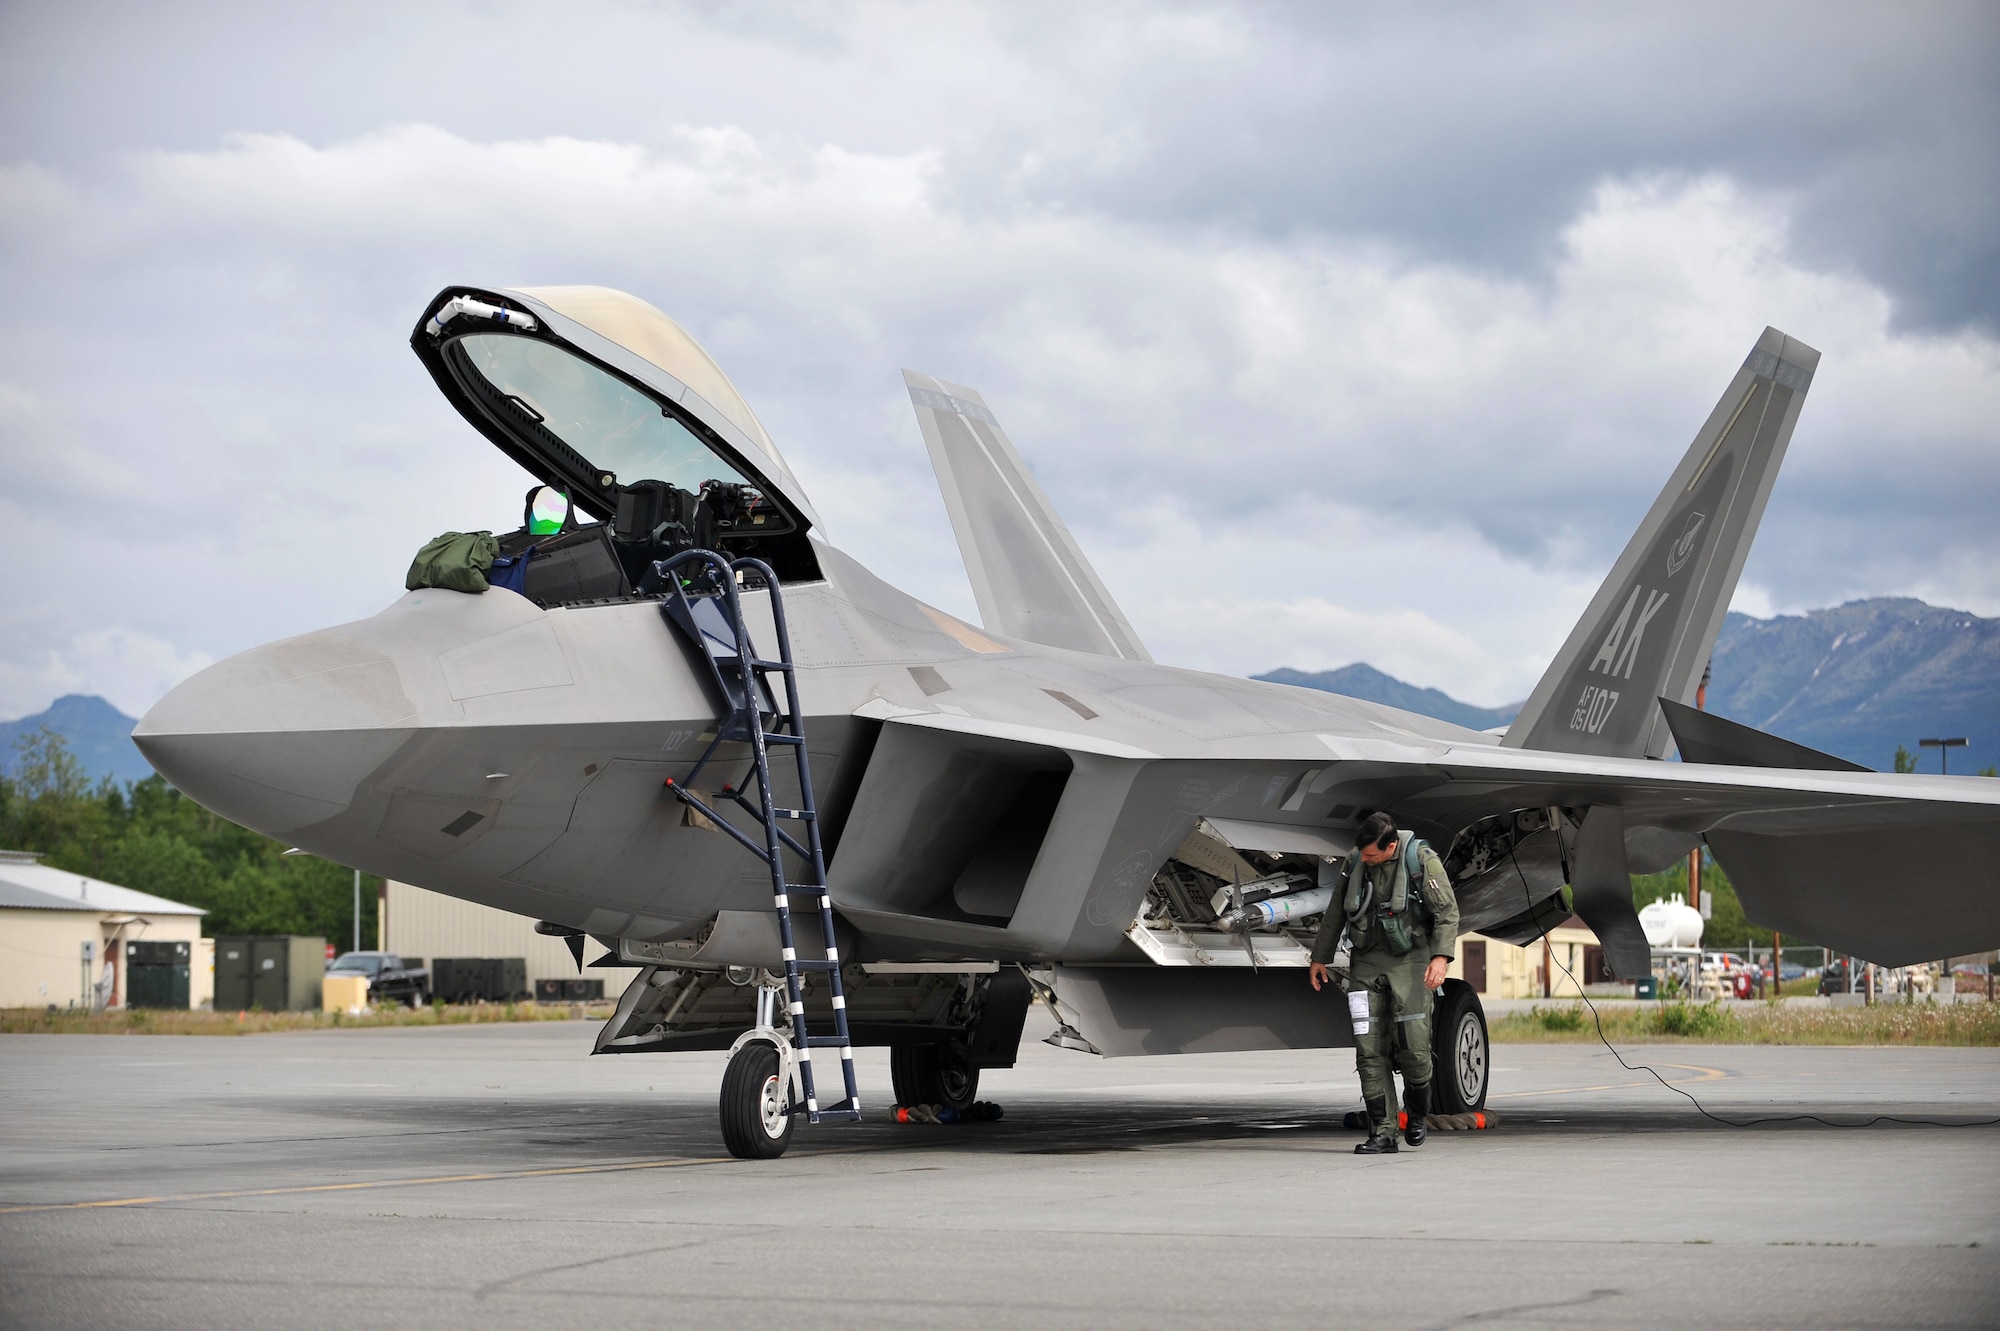 Lt. Col. John Hillyer conducts pre-flight checks on his F-22 Raptor fighter aircraft June 17, 2009, during Northern Edge 09 at Elmendorf Air Force Base, Alaska. Hillyer is the 477th Fighter Group commander at Elmendorf AFB. Northern Edge is Alaska's largest military training exercise that prepares joint forces to respond to crises throughout the Asia-Pacific region. (U.S. Air Force photo/Master Sgt. Shane A. Cuomo)